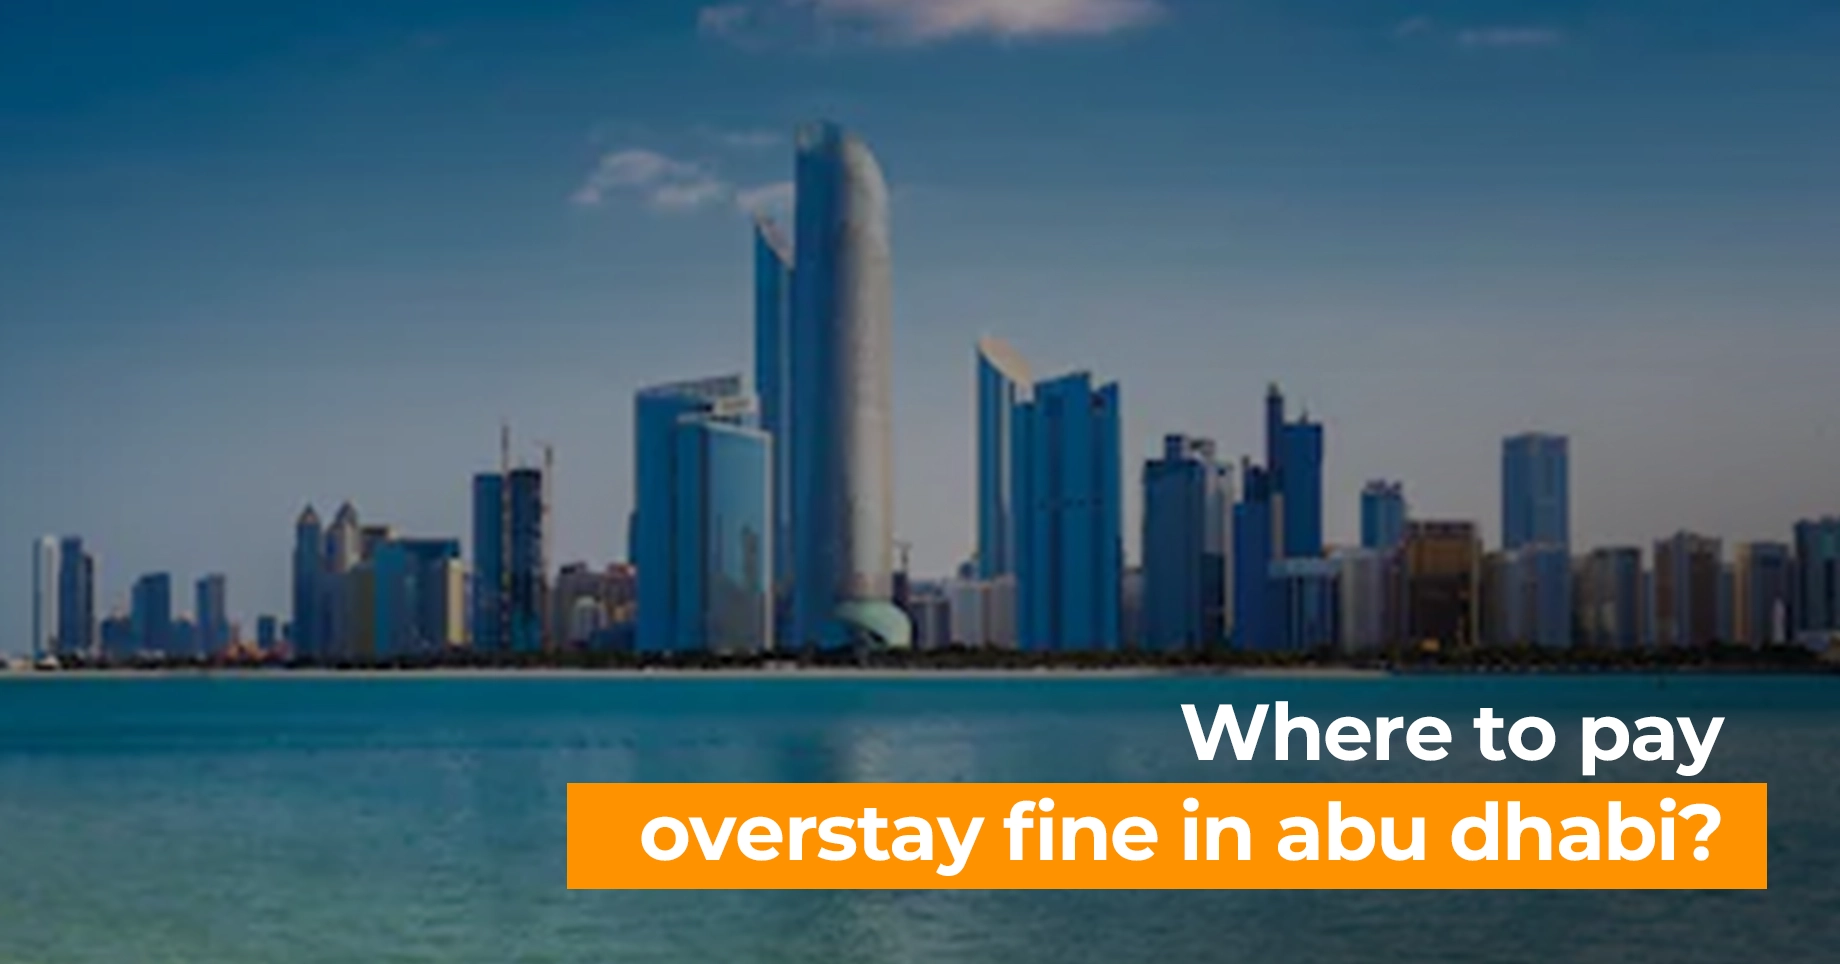 where to pay overstay fine in abu dhabi